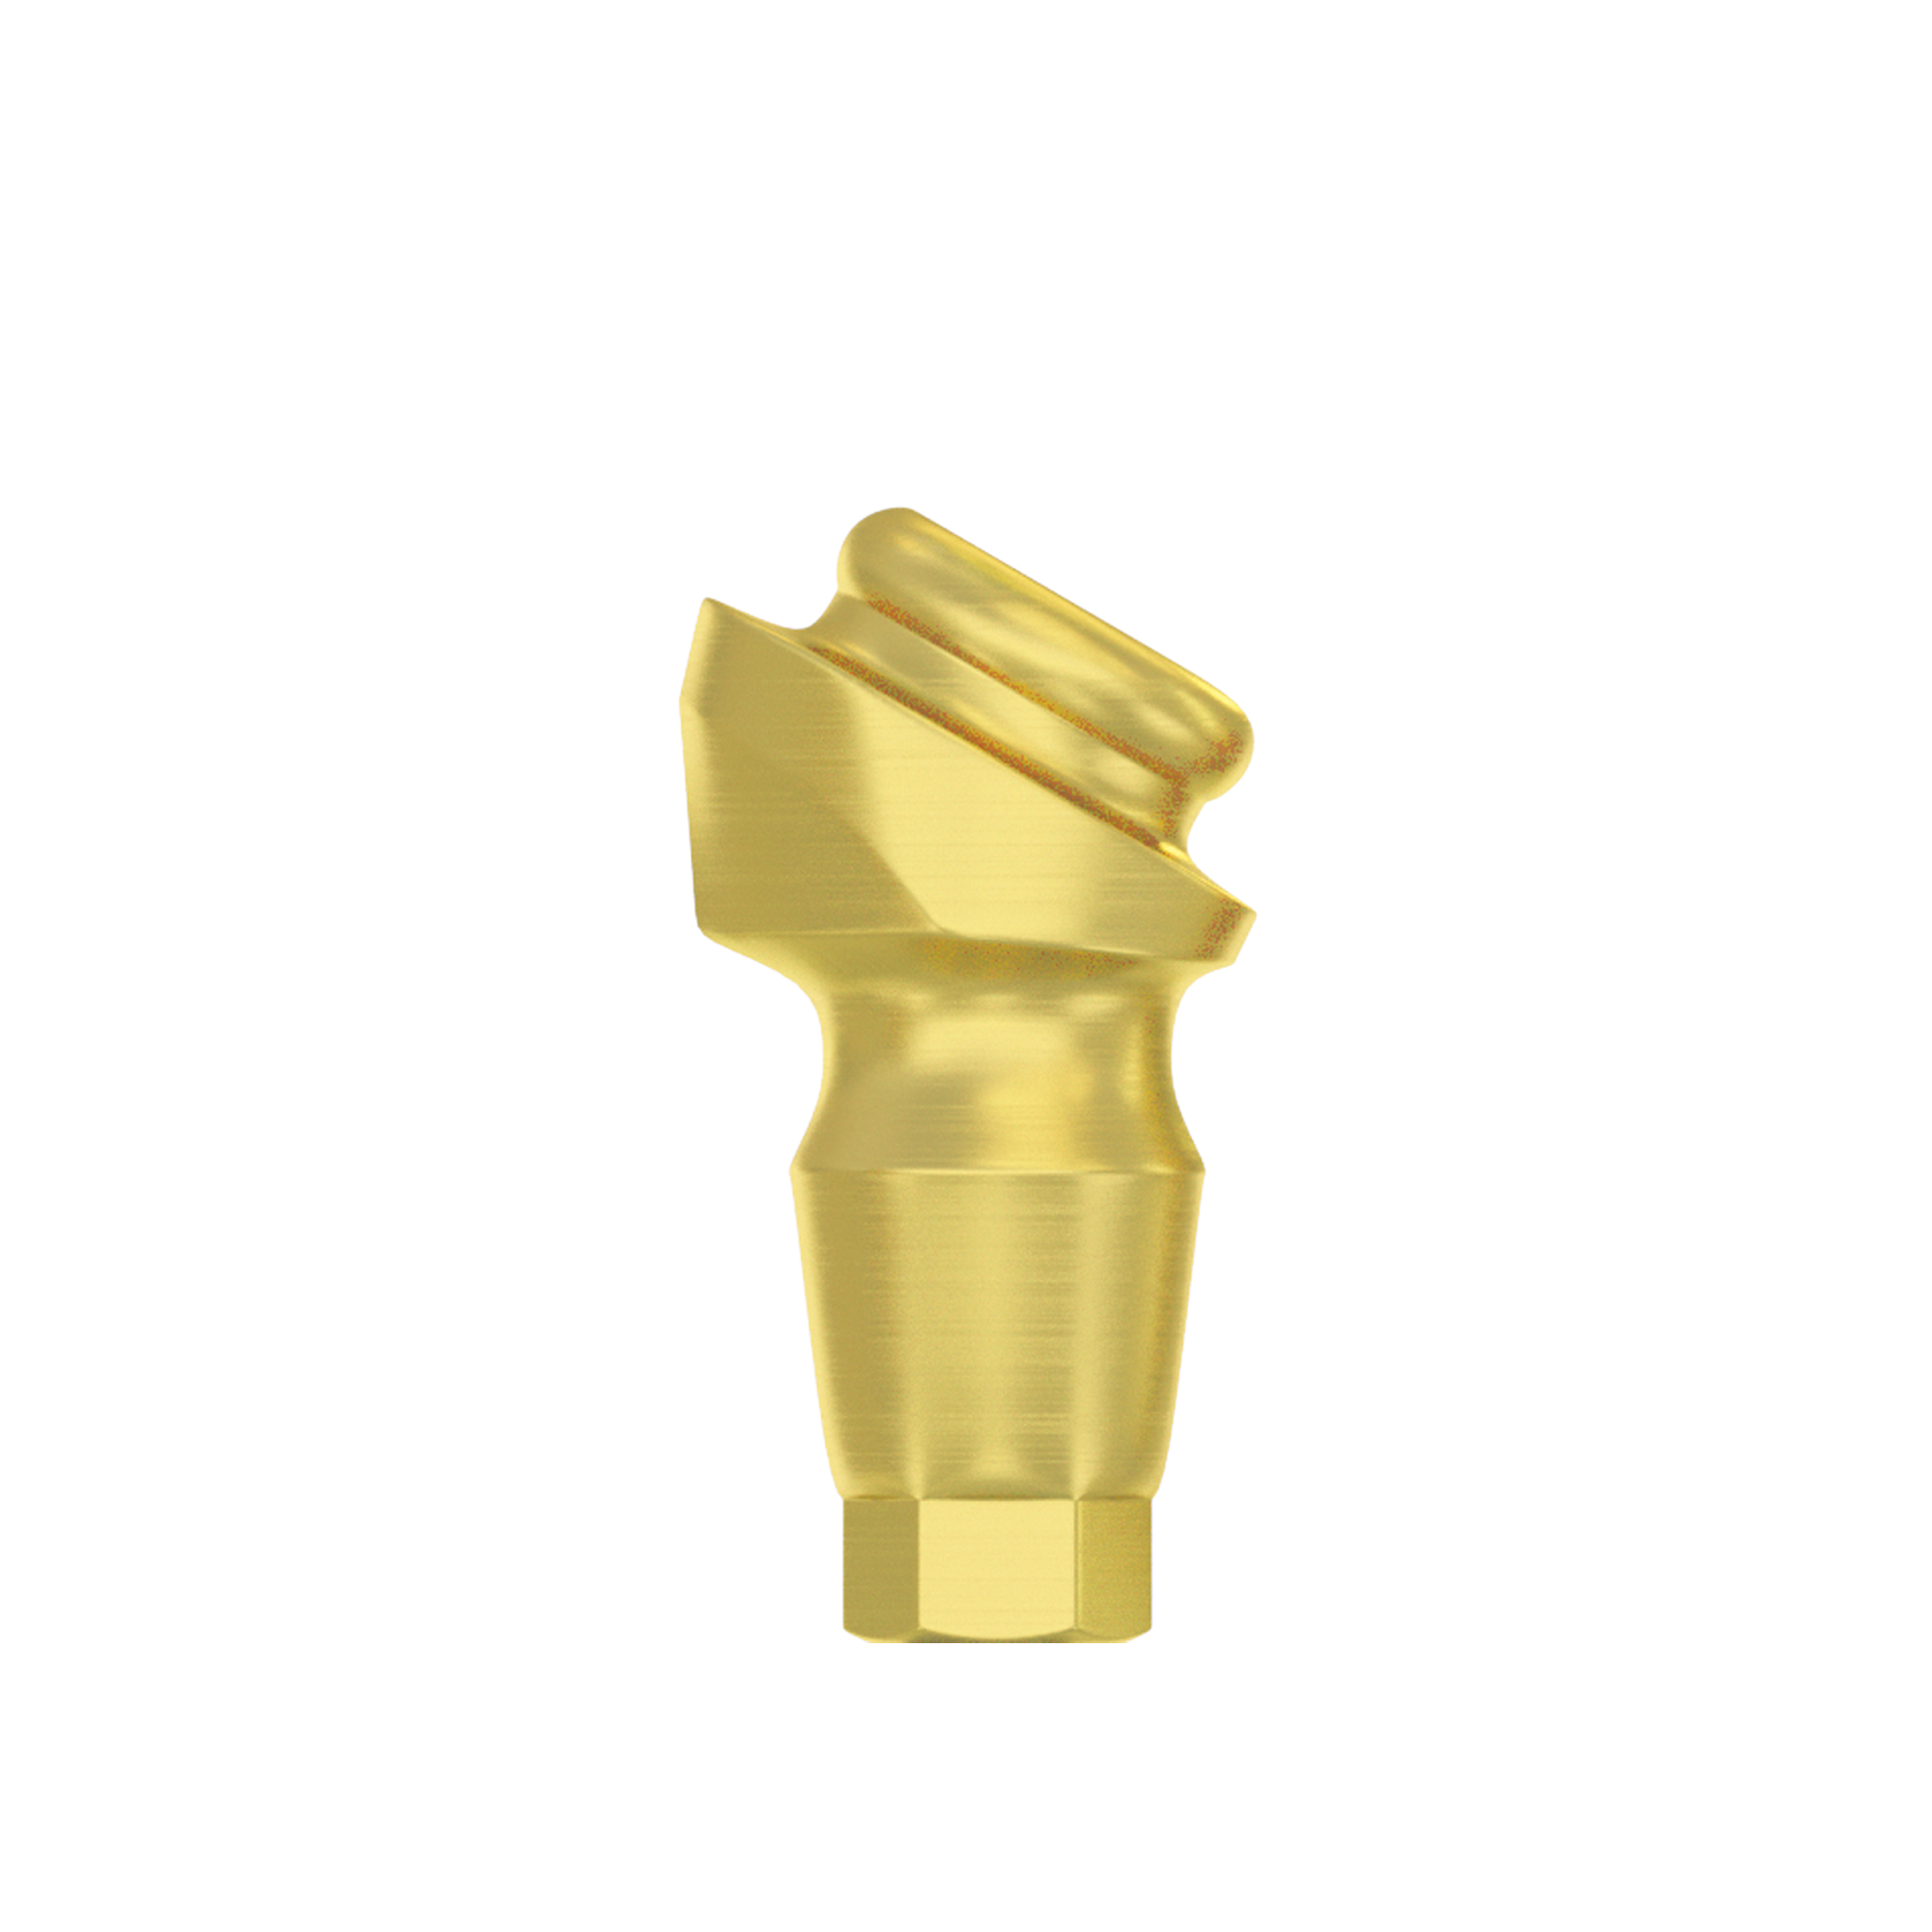 DSI Angulated Loc-in Abutment 5.0mm Full Set - Conical Connection RP Ø4.3-5.0mm